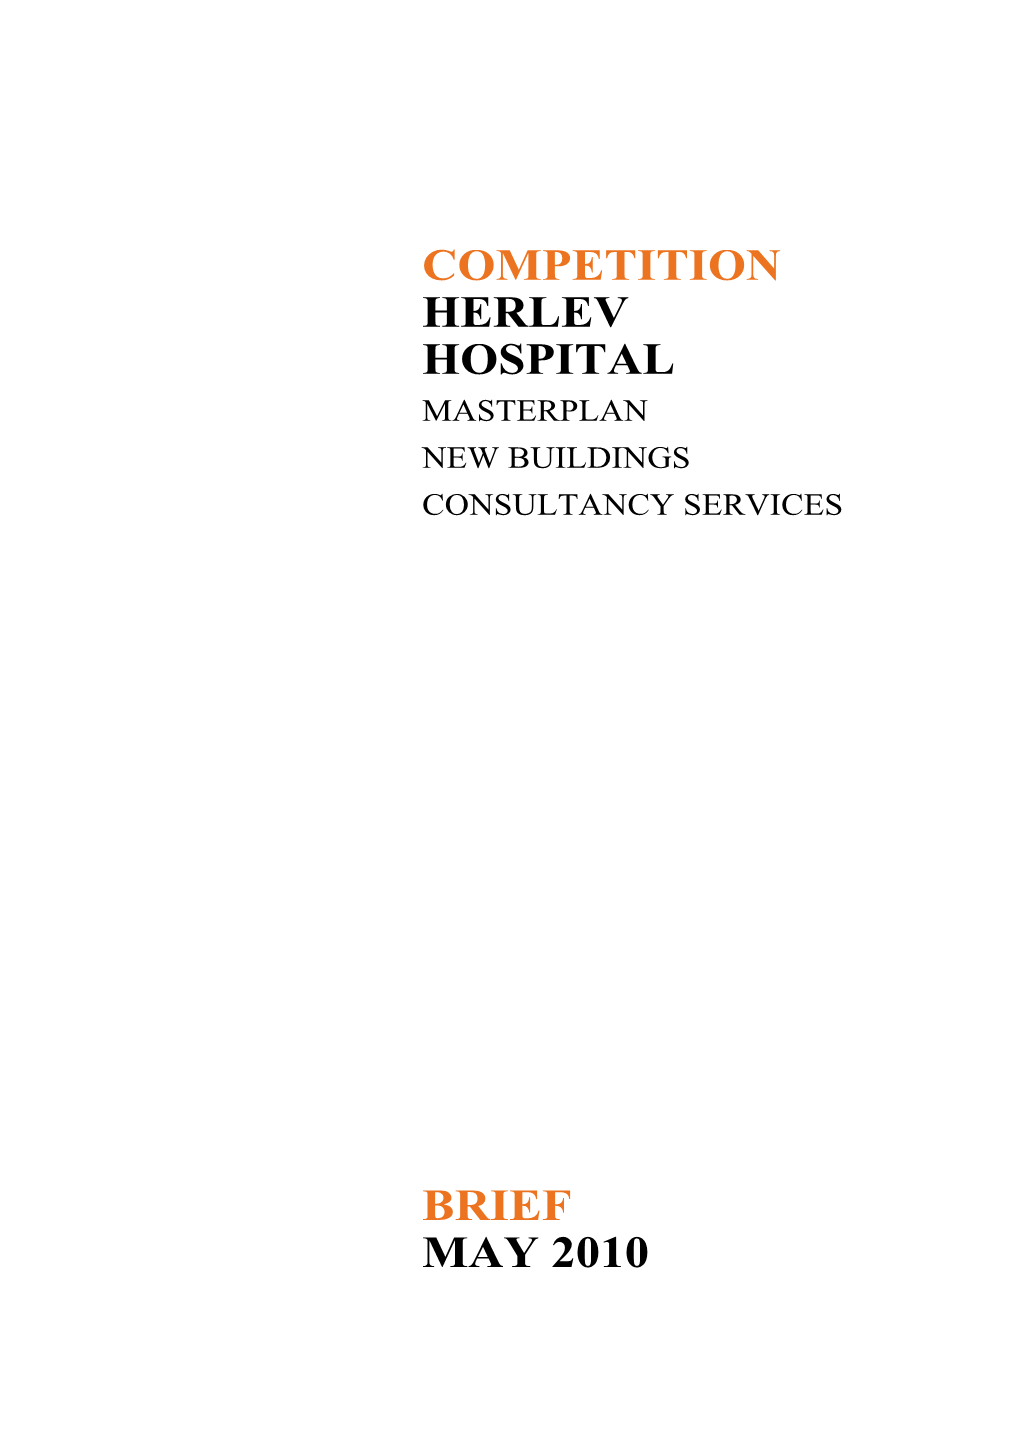 Competition Herlev Hospital Brief May 2010